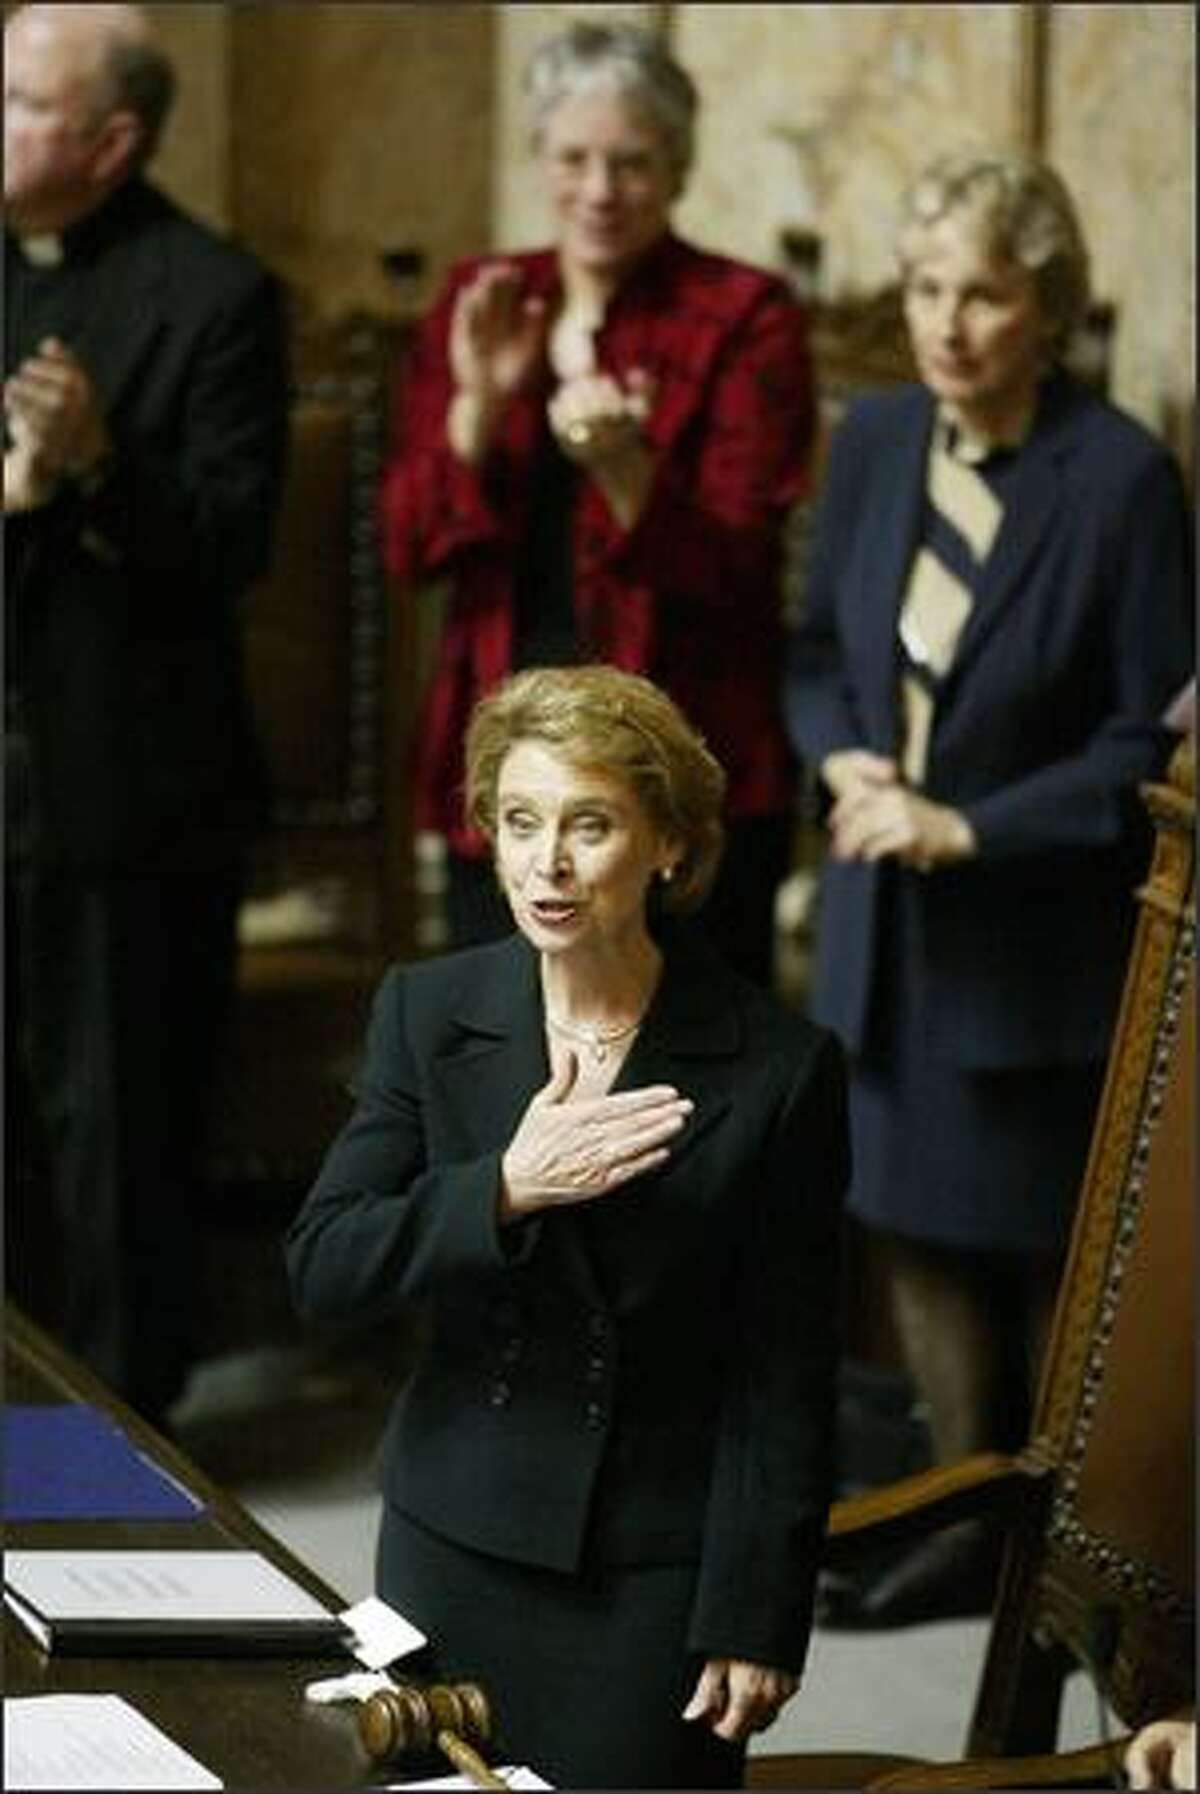 With a hand placed over her heart, Christine Gregoire acknowledges her family sitting in the gallery after she is sworn in as governor in the Legislature.